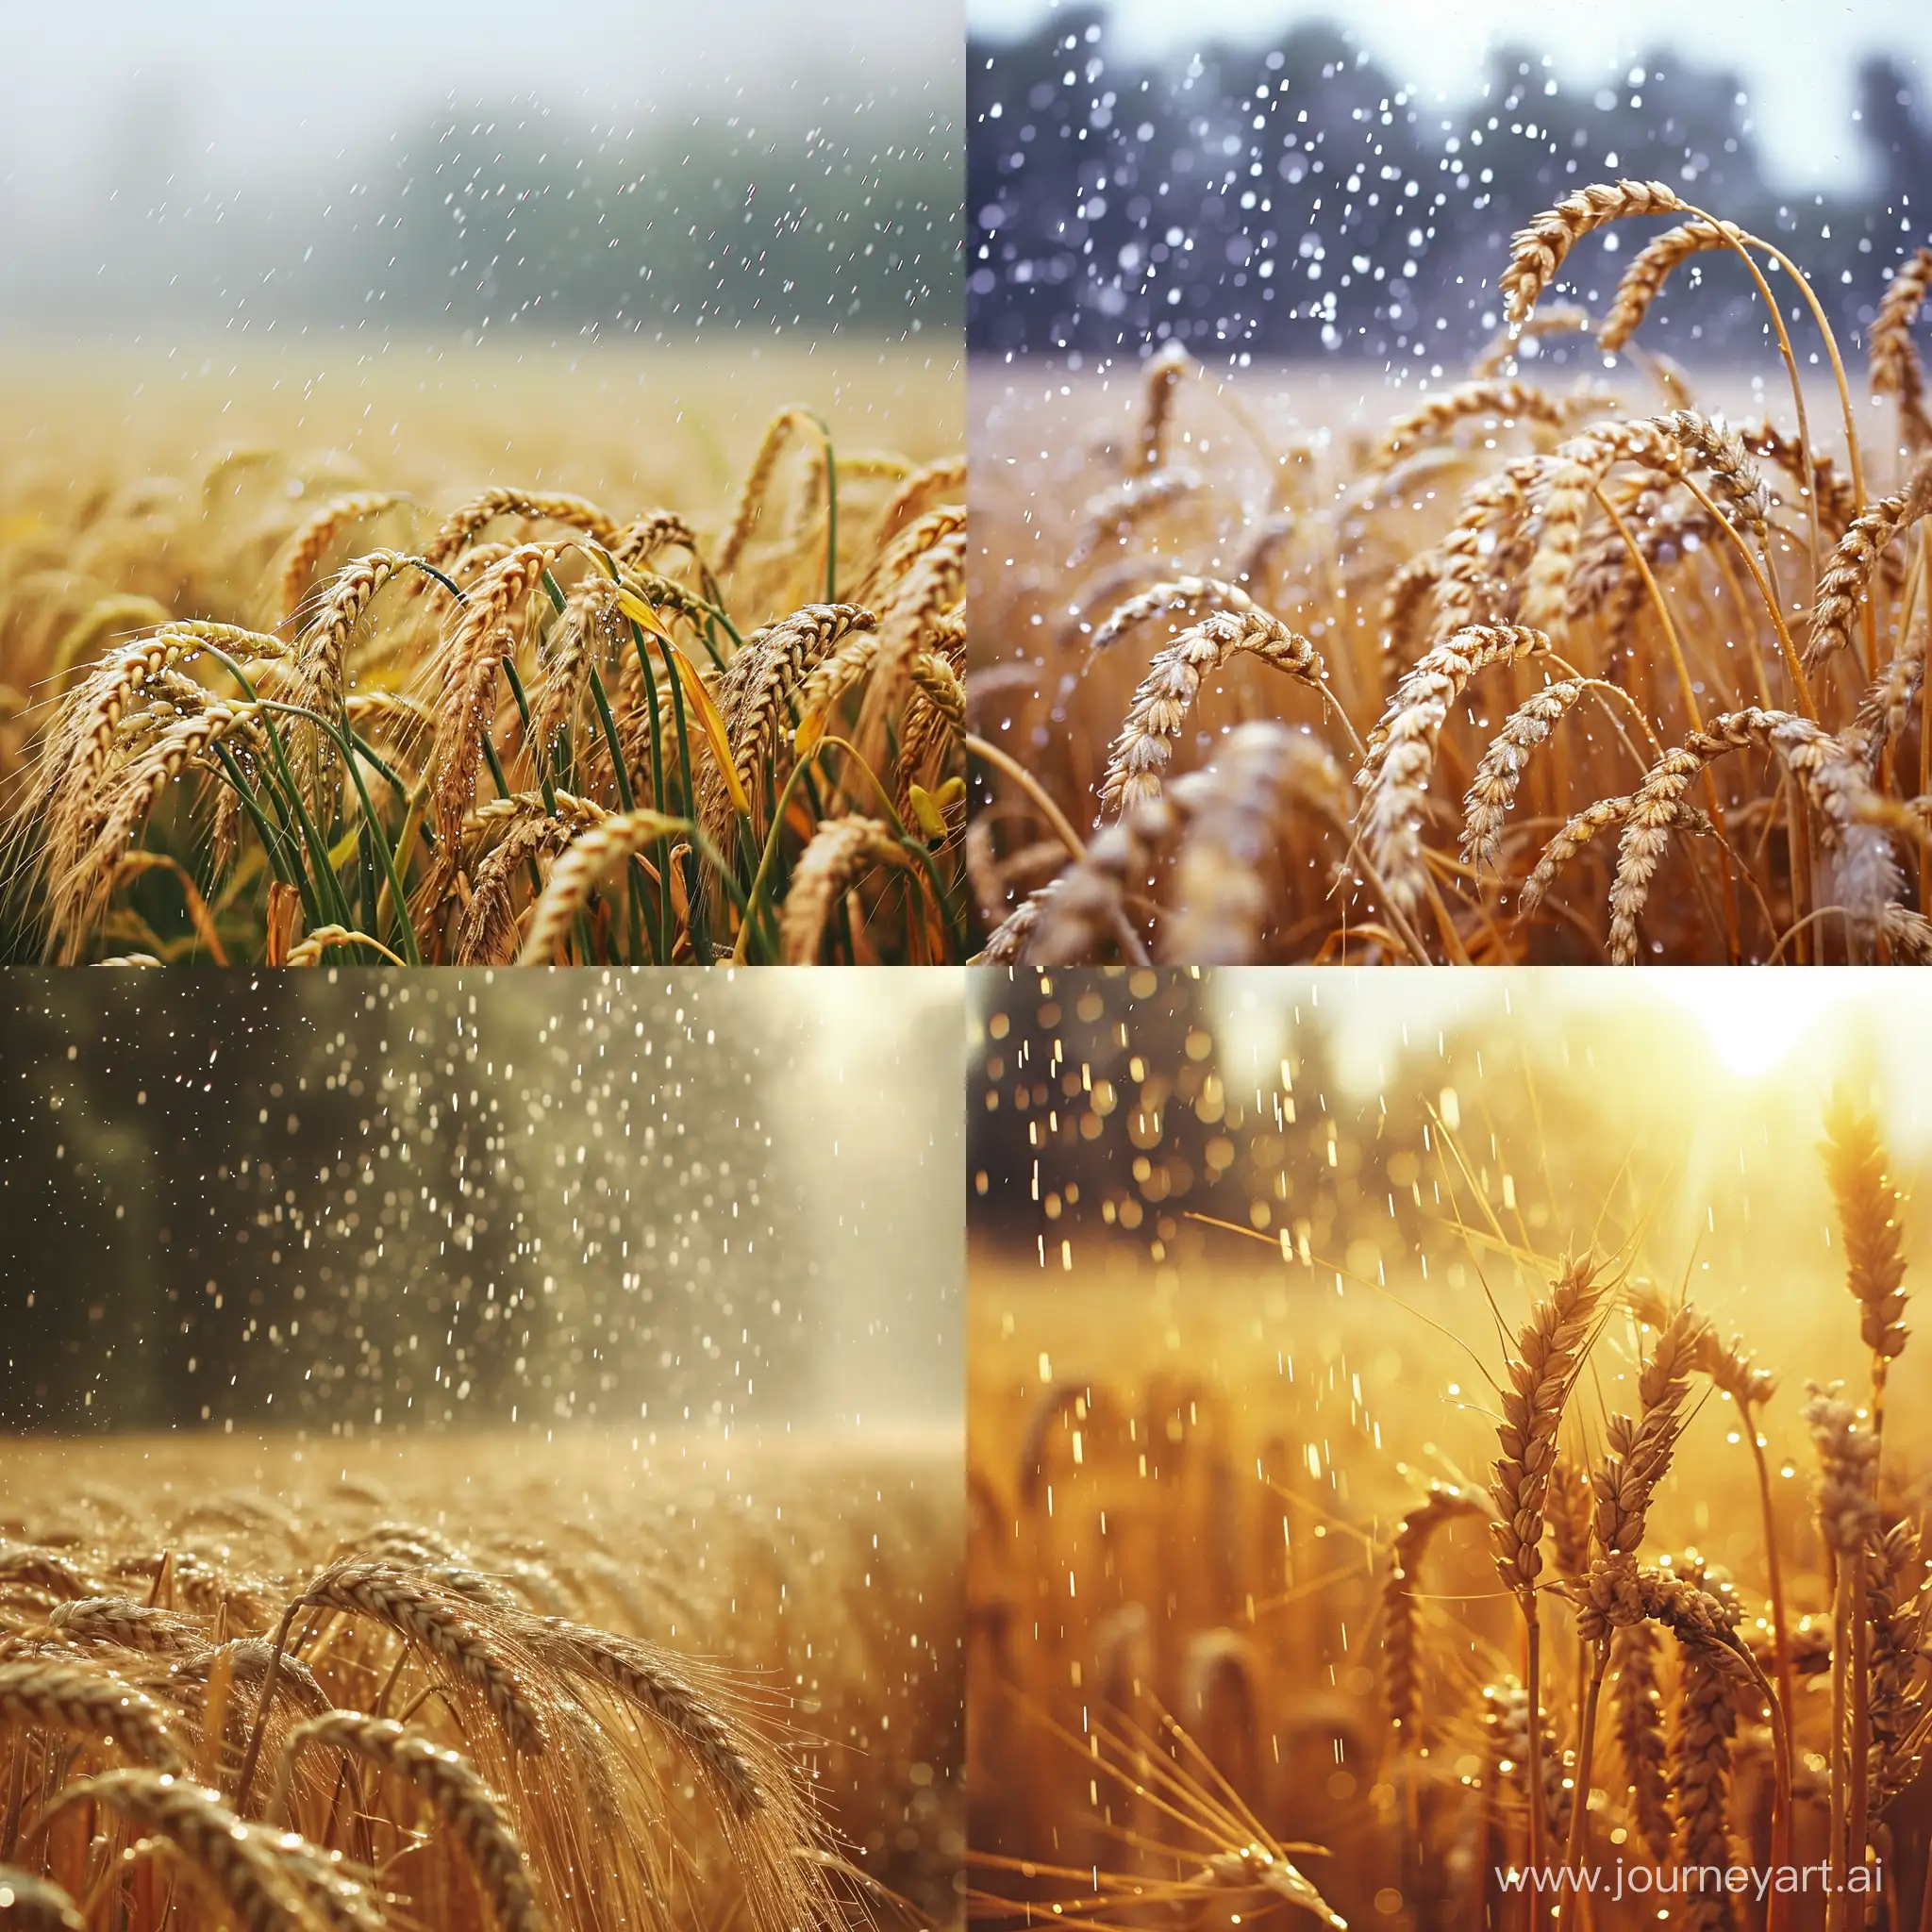 Captivating-Rainfall-Over-PhytoTreated-Wheat-Field